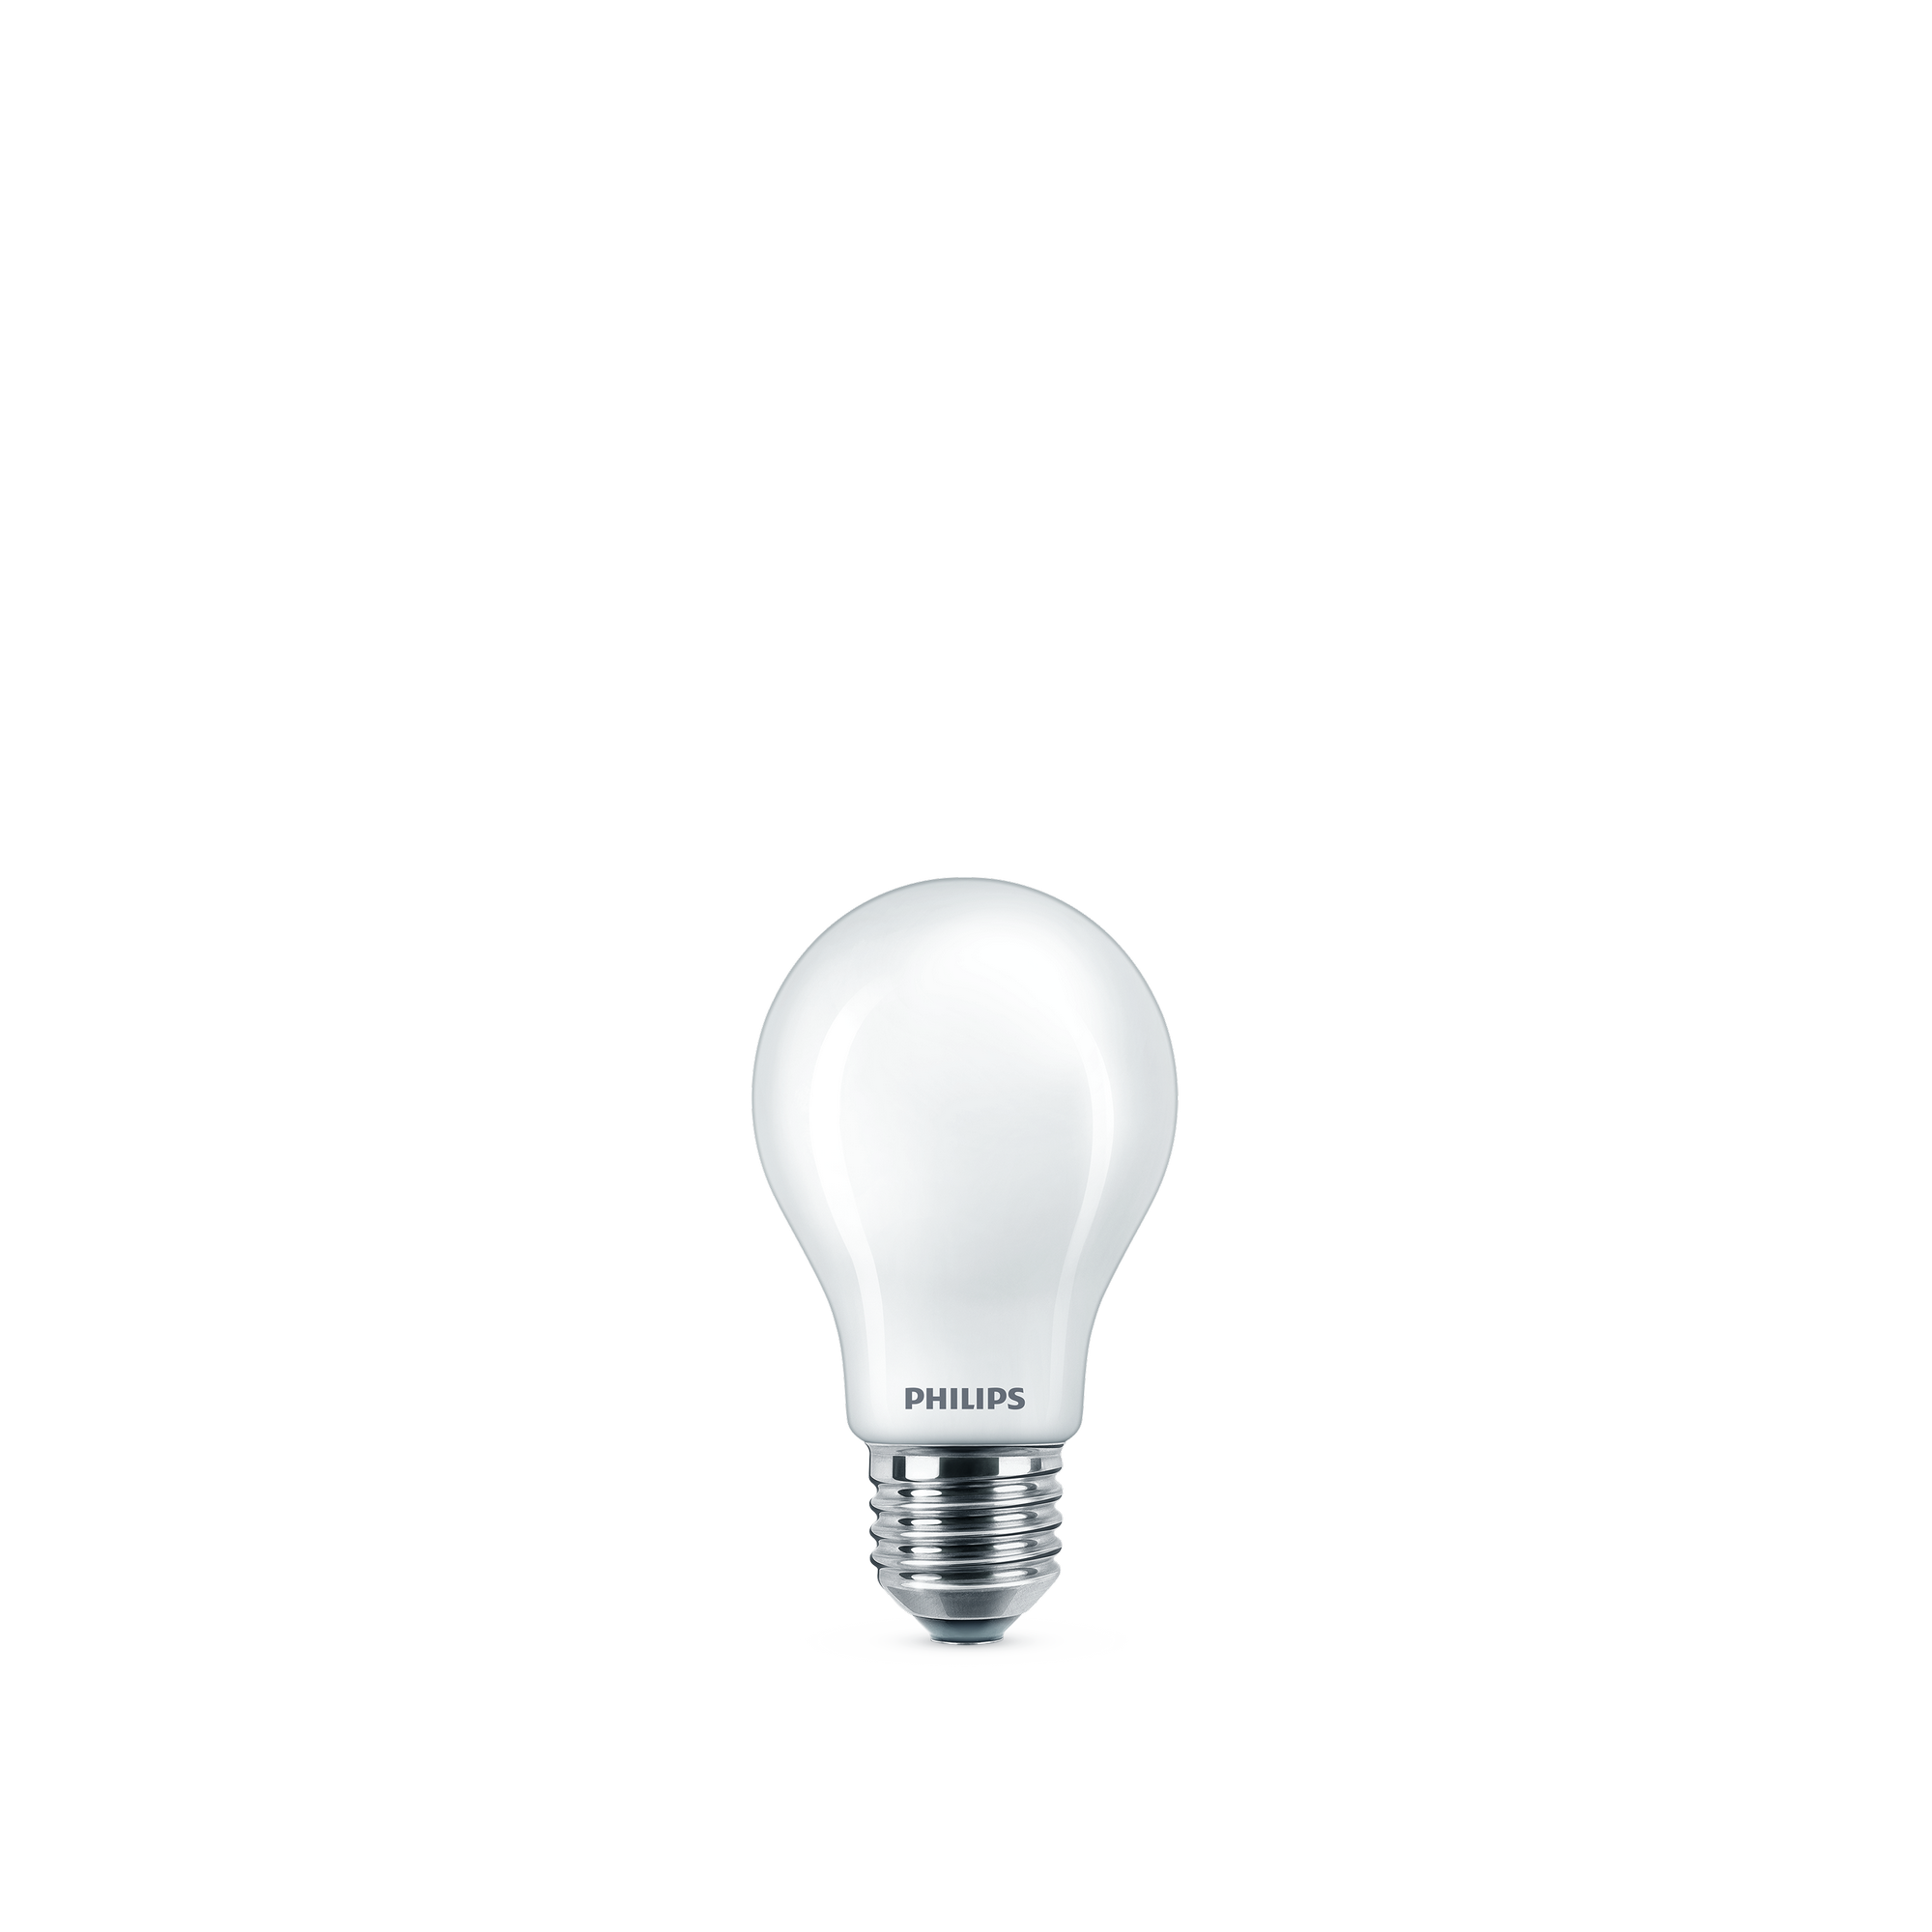 LED-Lampe 'Warmglow' Glühlampe E27 1560 lm + product picture